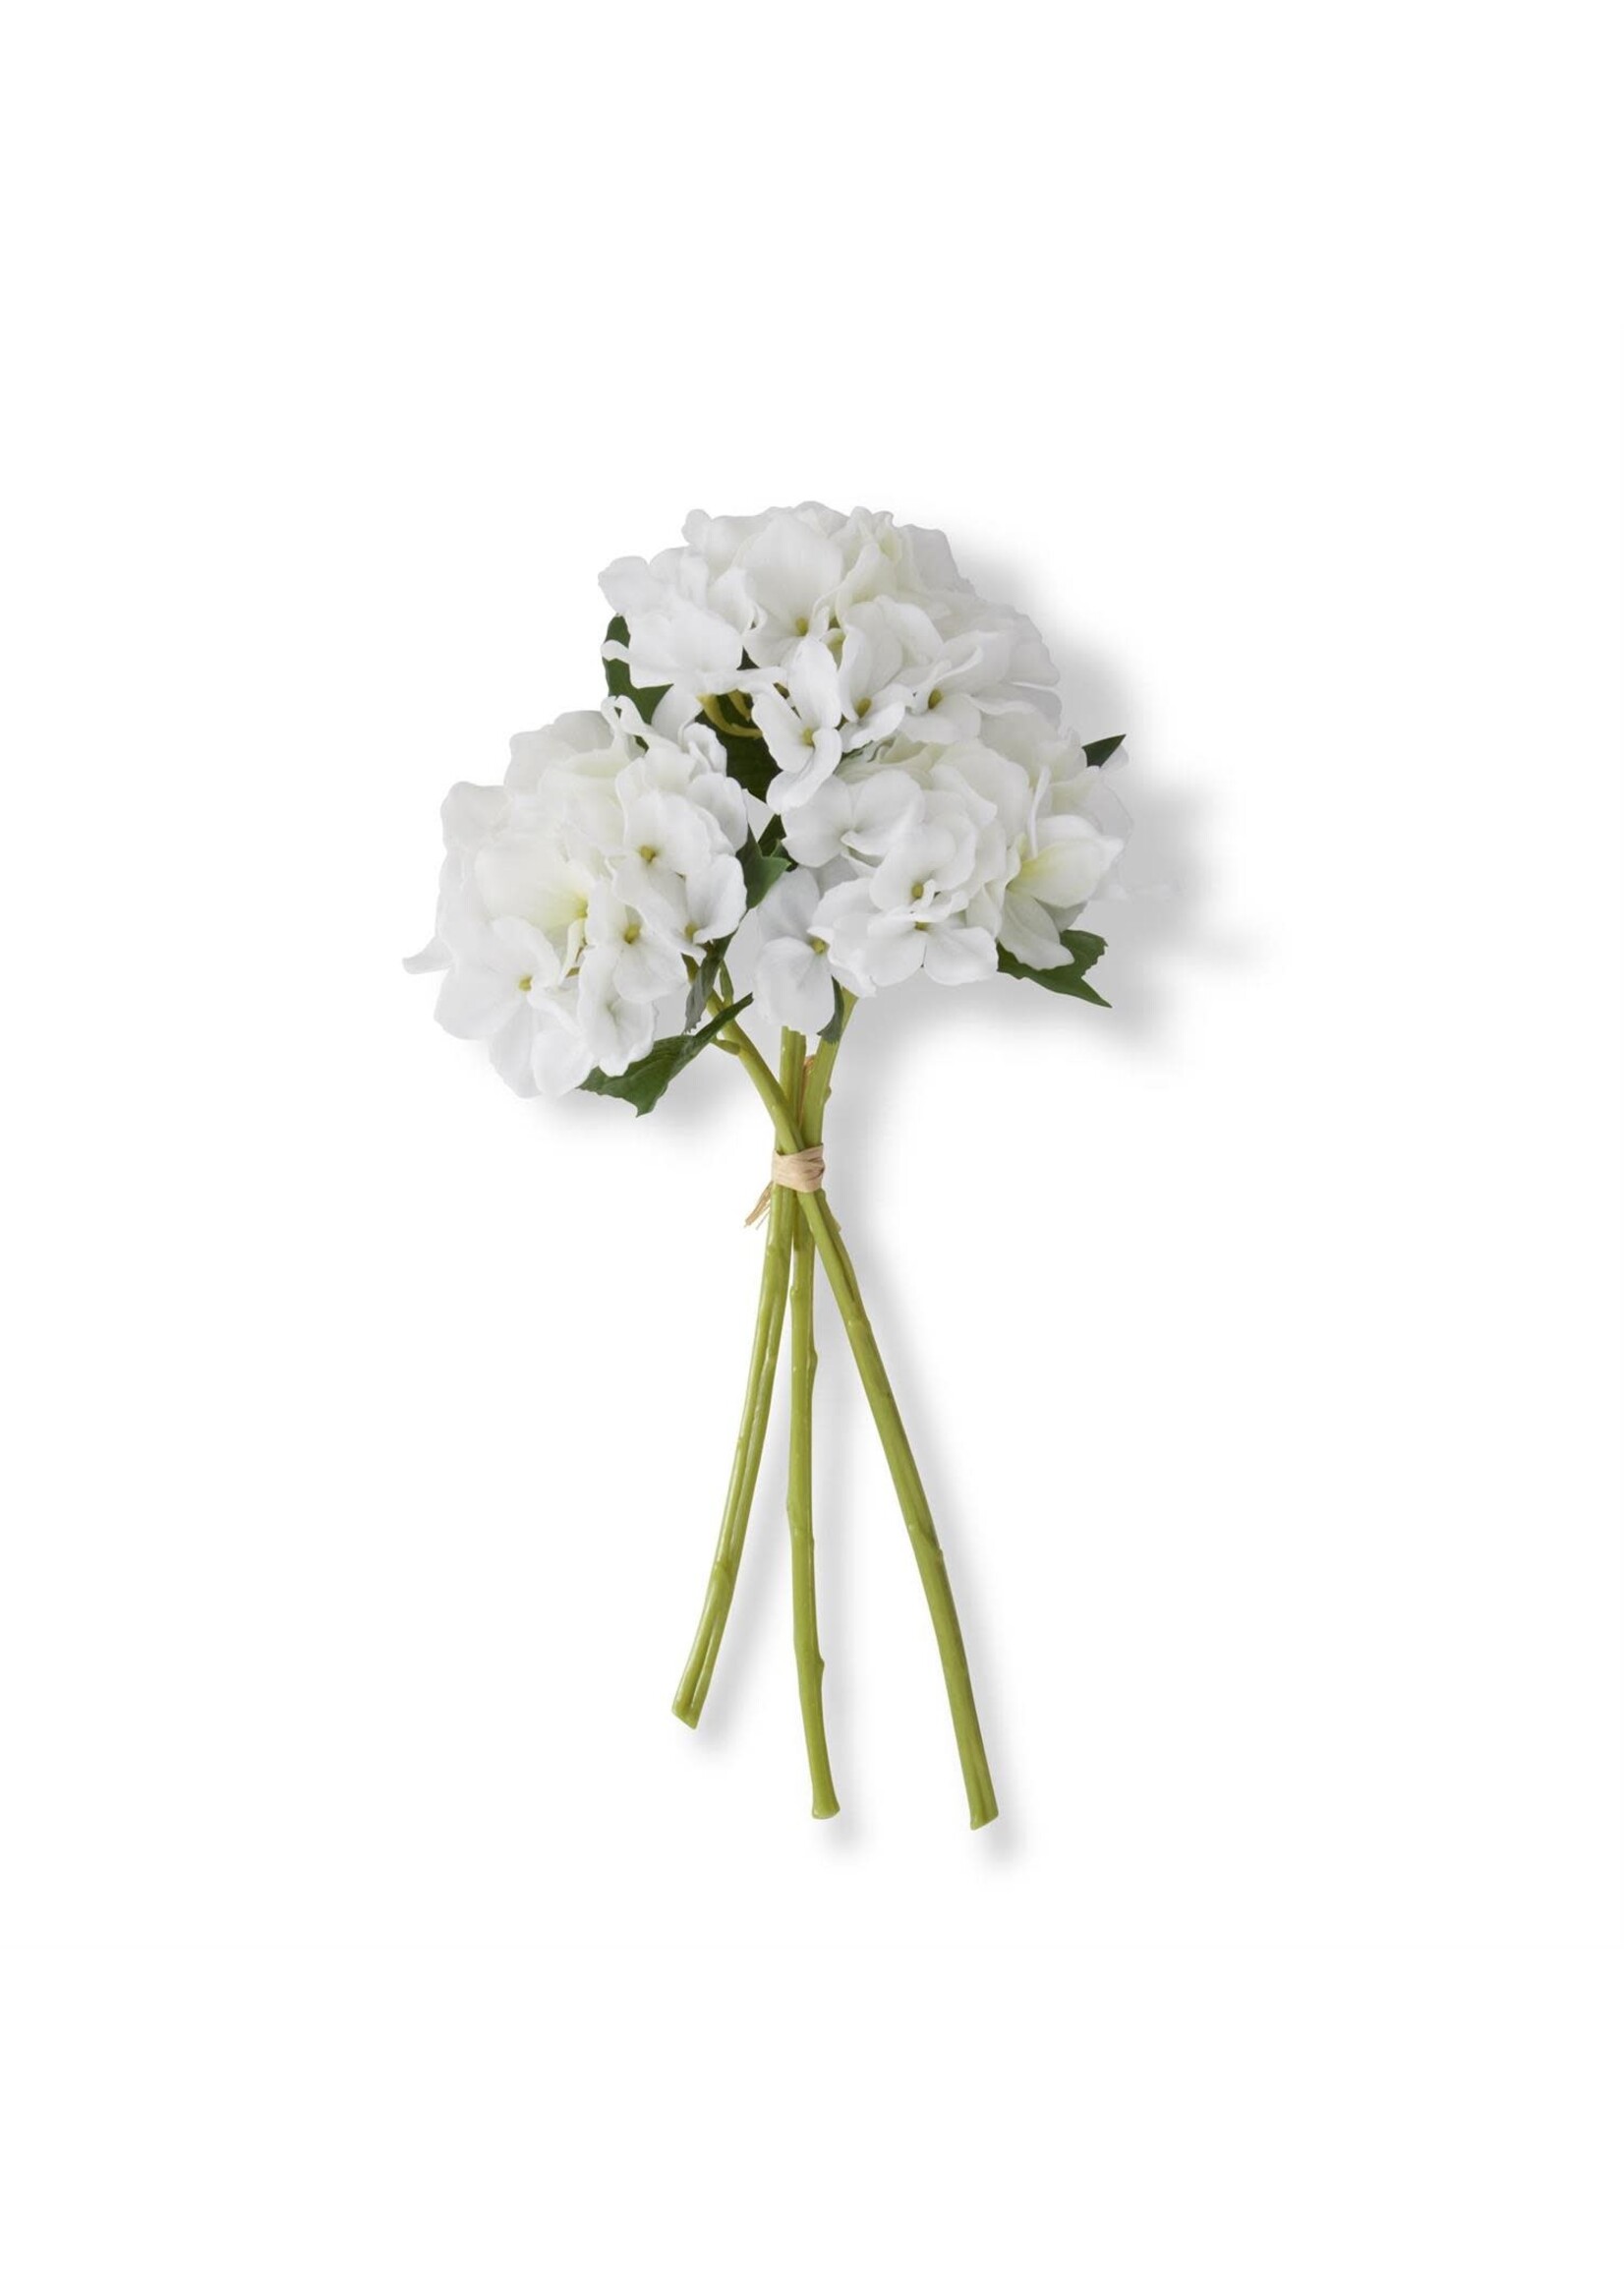 15 Inch White Real Touch Hydrangea Bundle (3 Stems)